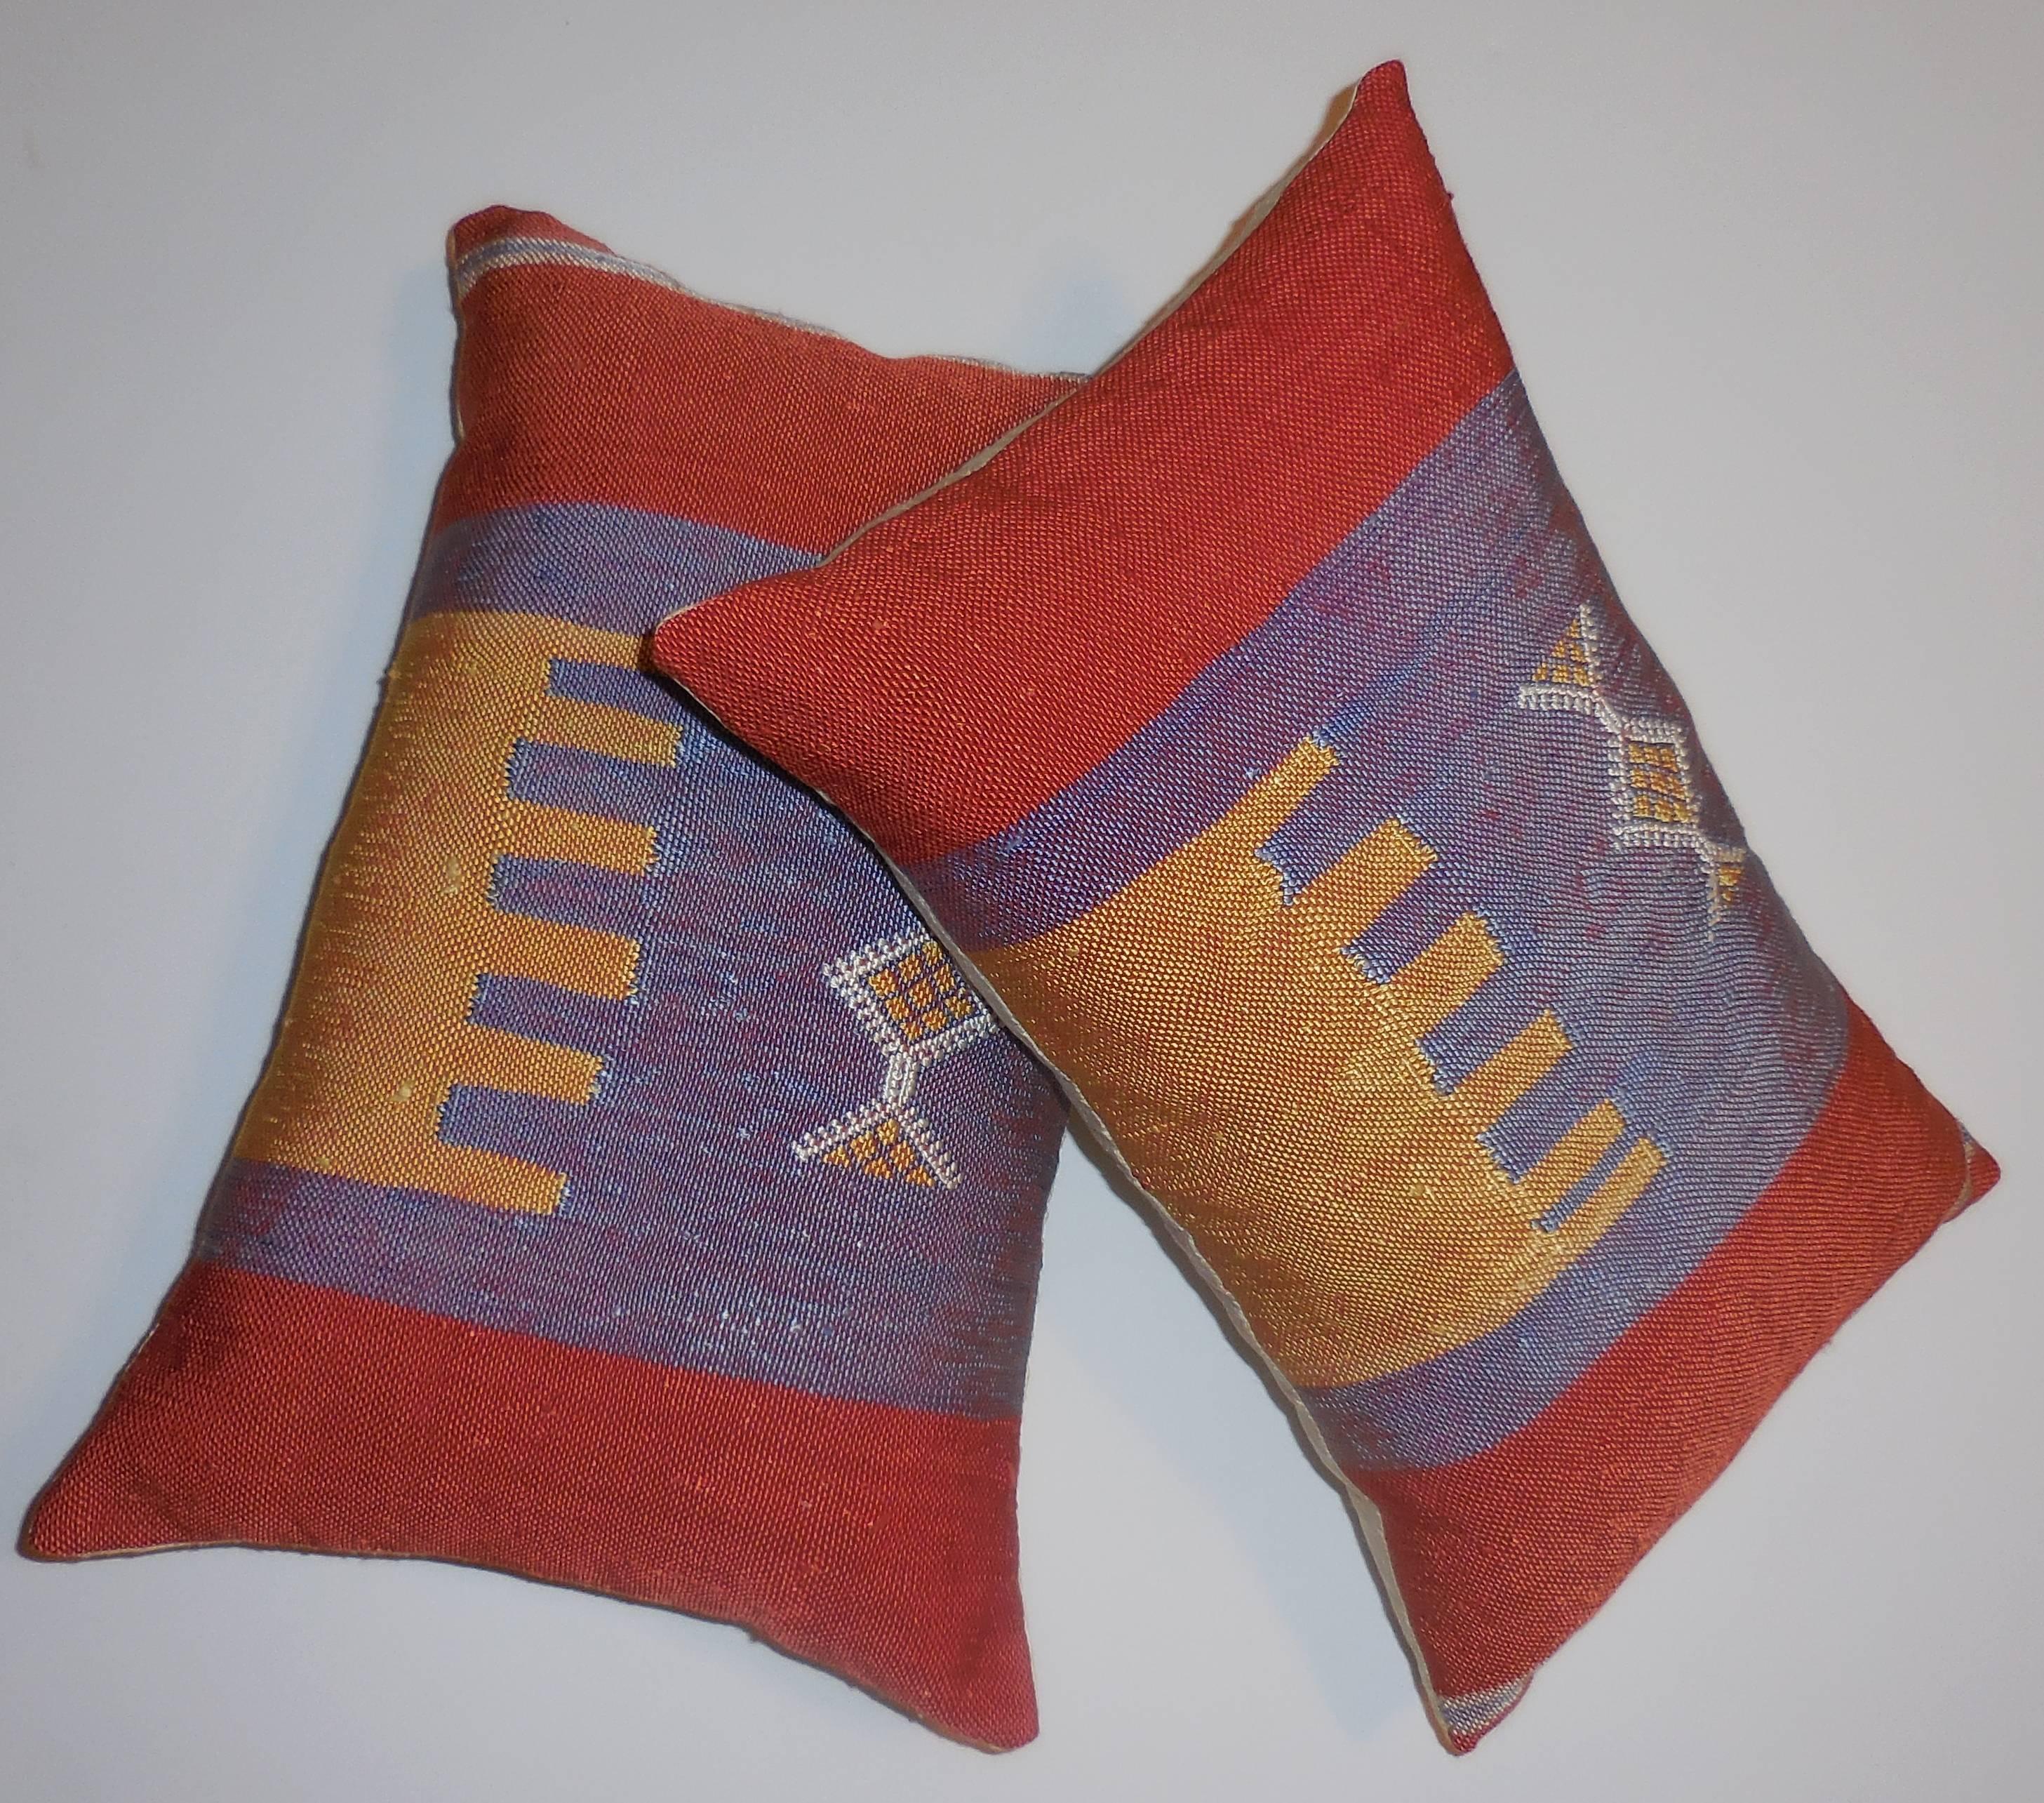 Colorful abstract pillows made from flat-weave Moroccan textile. Back of pillows are made of silk.